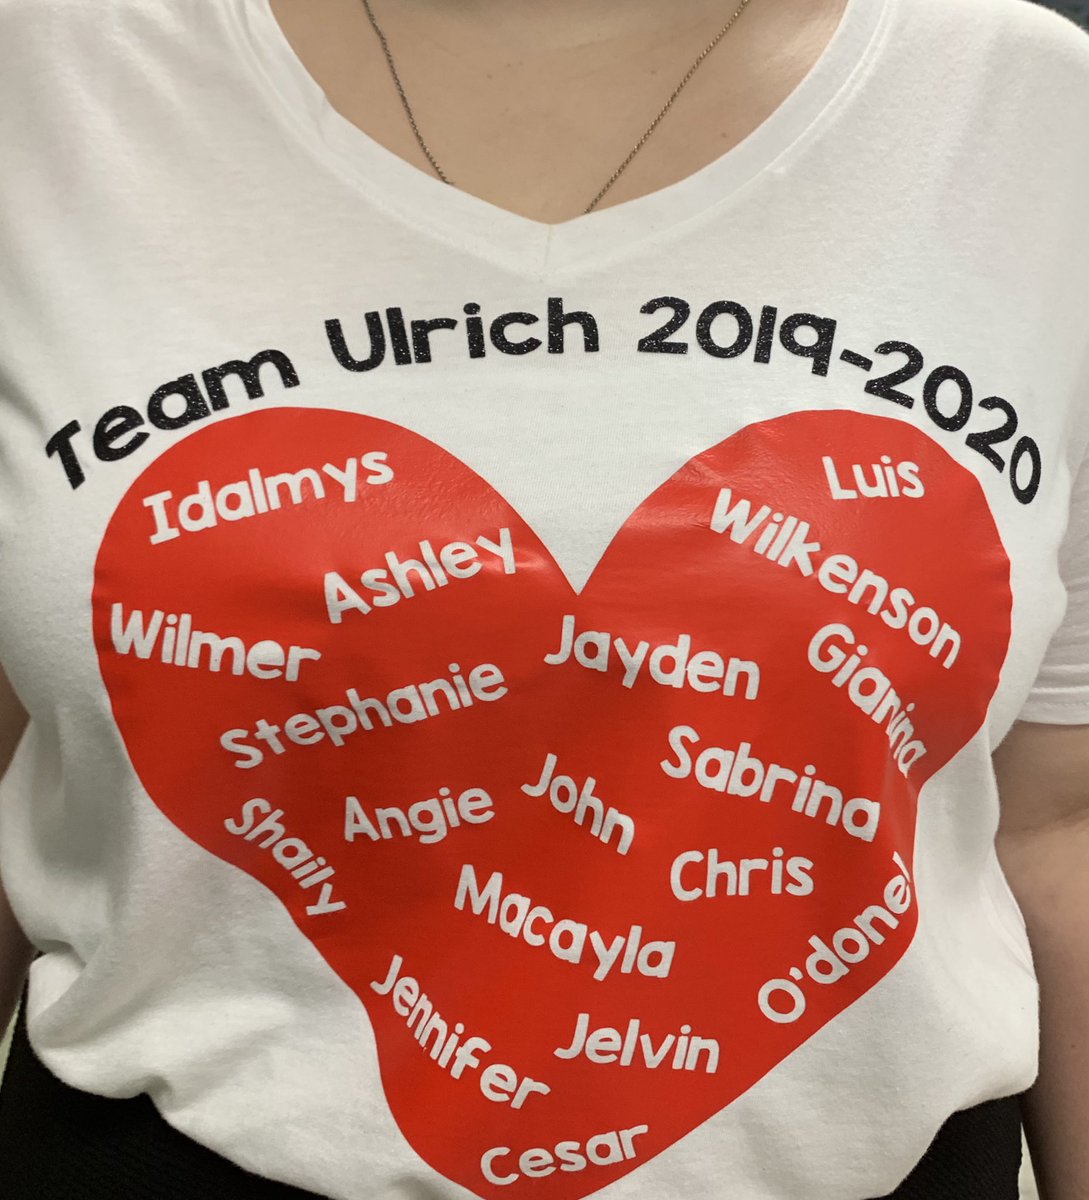 Got #TeamUlrich on my mind on this beautiful #TeacherTee Tuesday! Can't wait to share our new online classroom with my favorite people on Monday!
 #eSpiritWeek @GGEseagulls #DistanceLearning